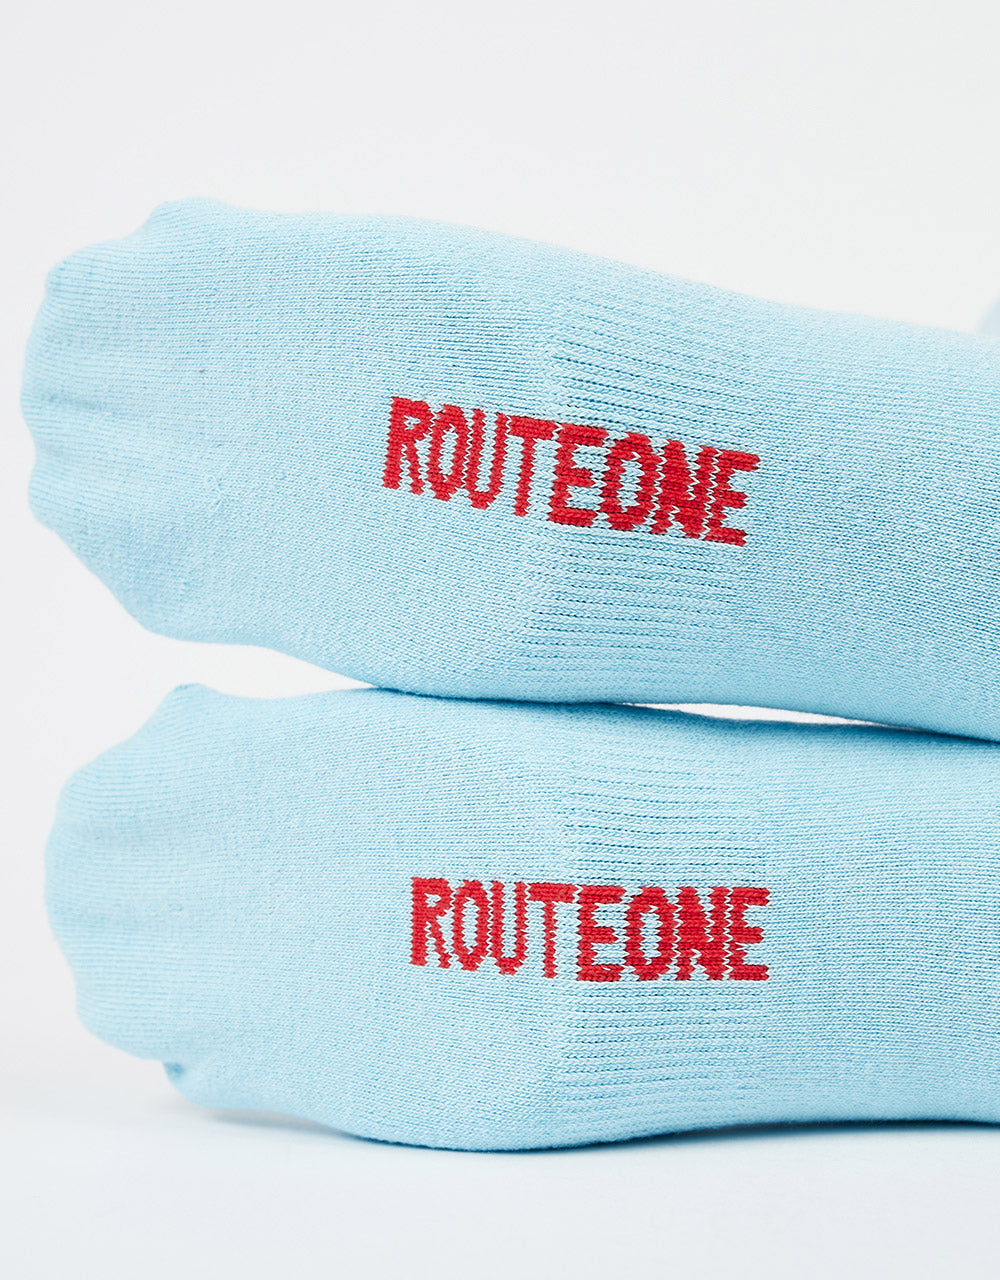 Route One Stay Cold Socks - Light Blue